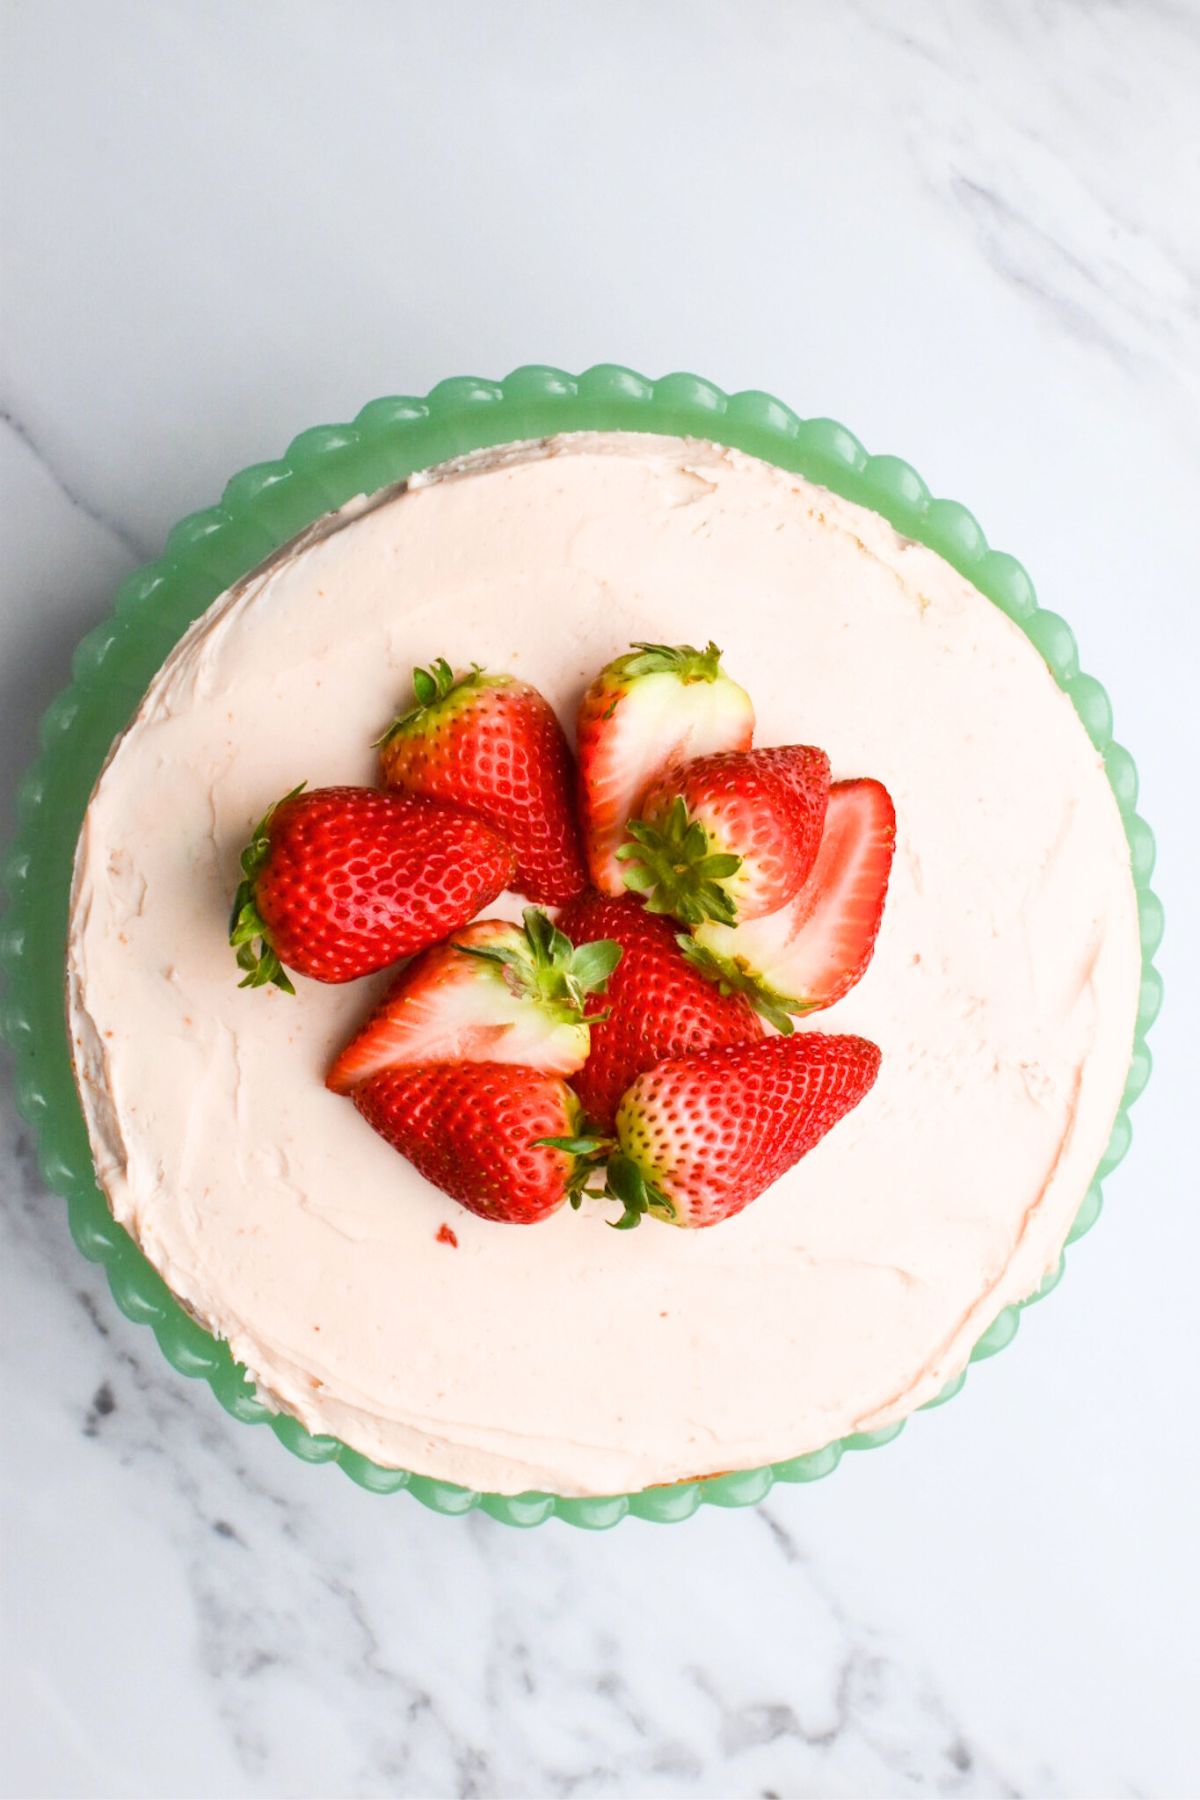 Top view of a strawberry crunch cake with light pink strawberry frosting and sliced strawberries on top.